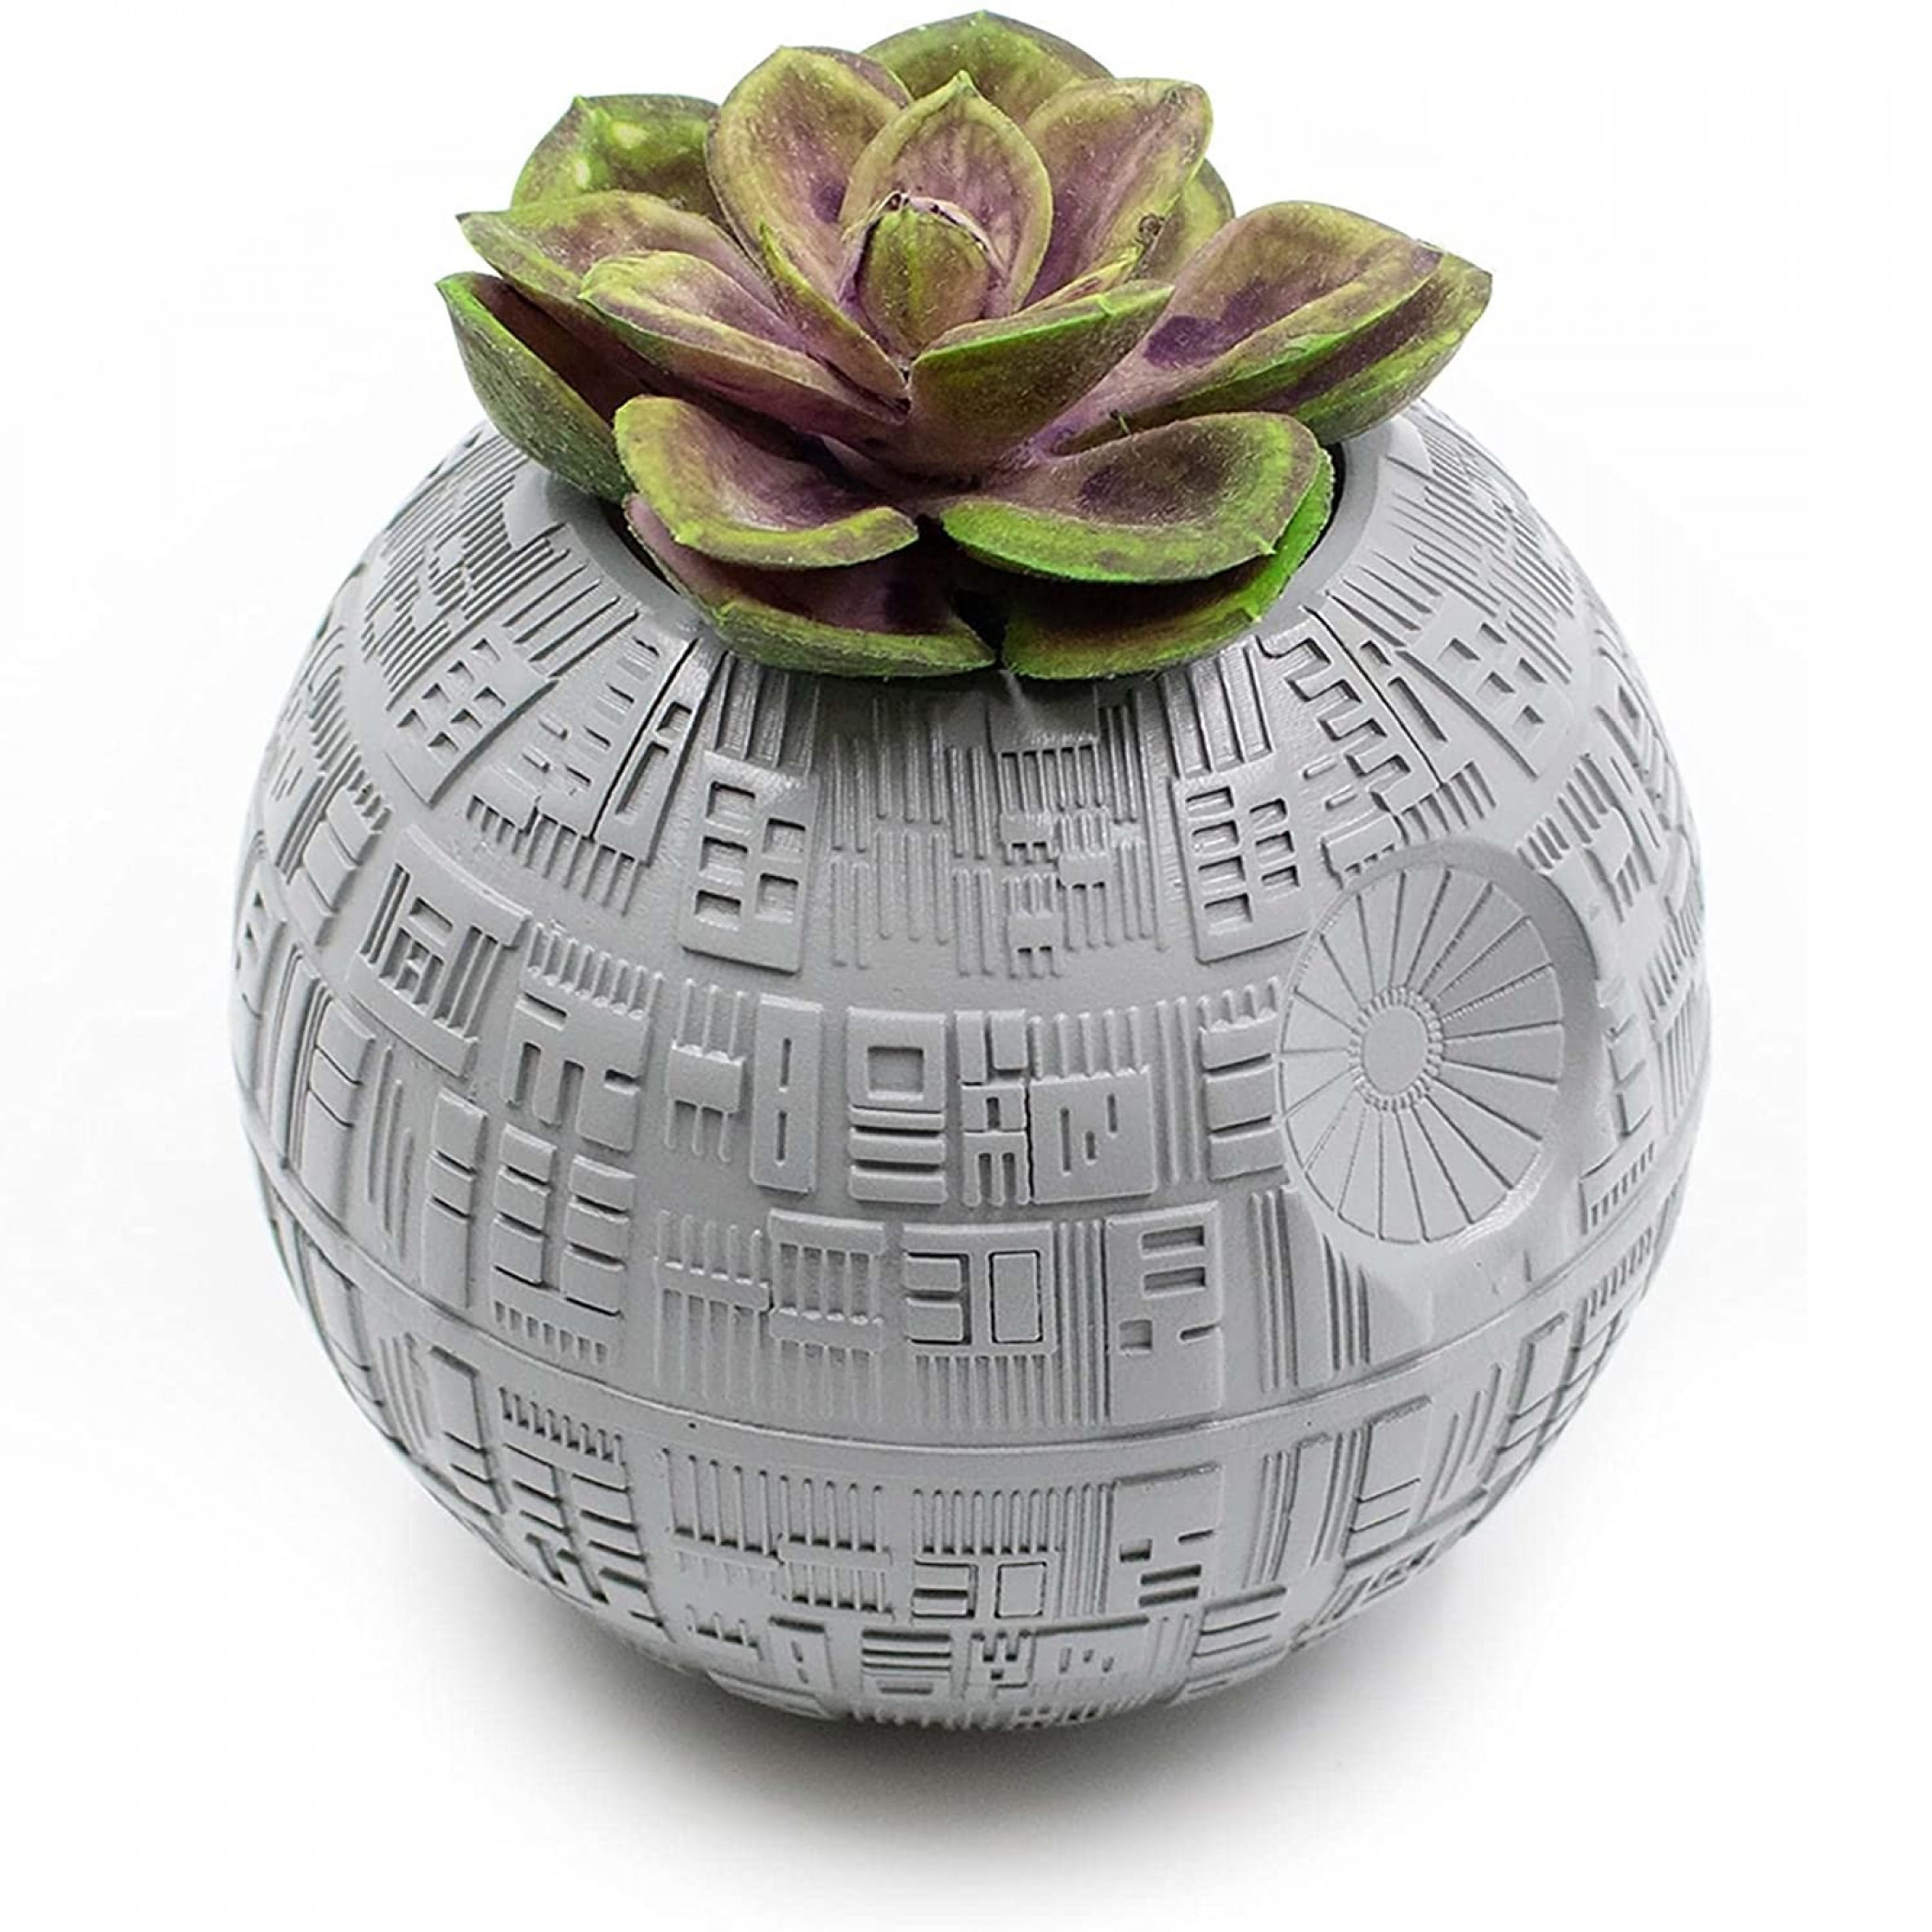 Star Wars A New Hope Death Star Ceramic Potted Planter